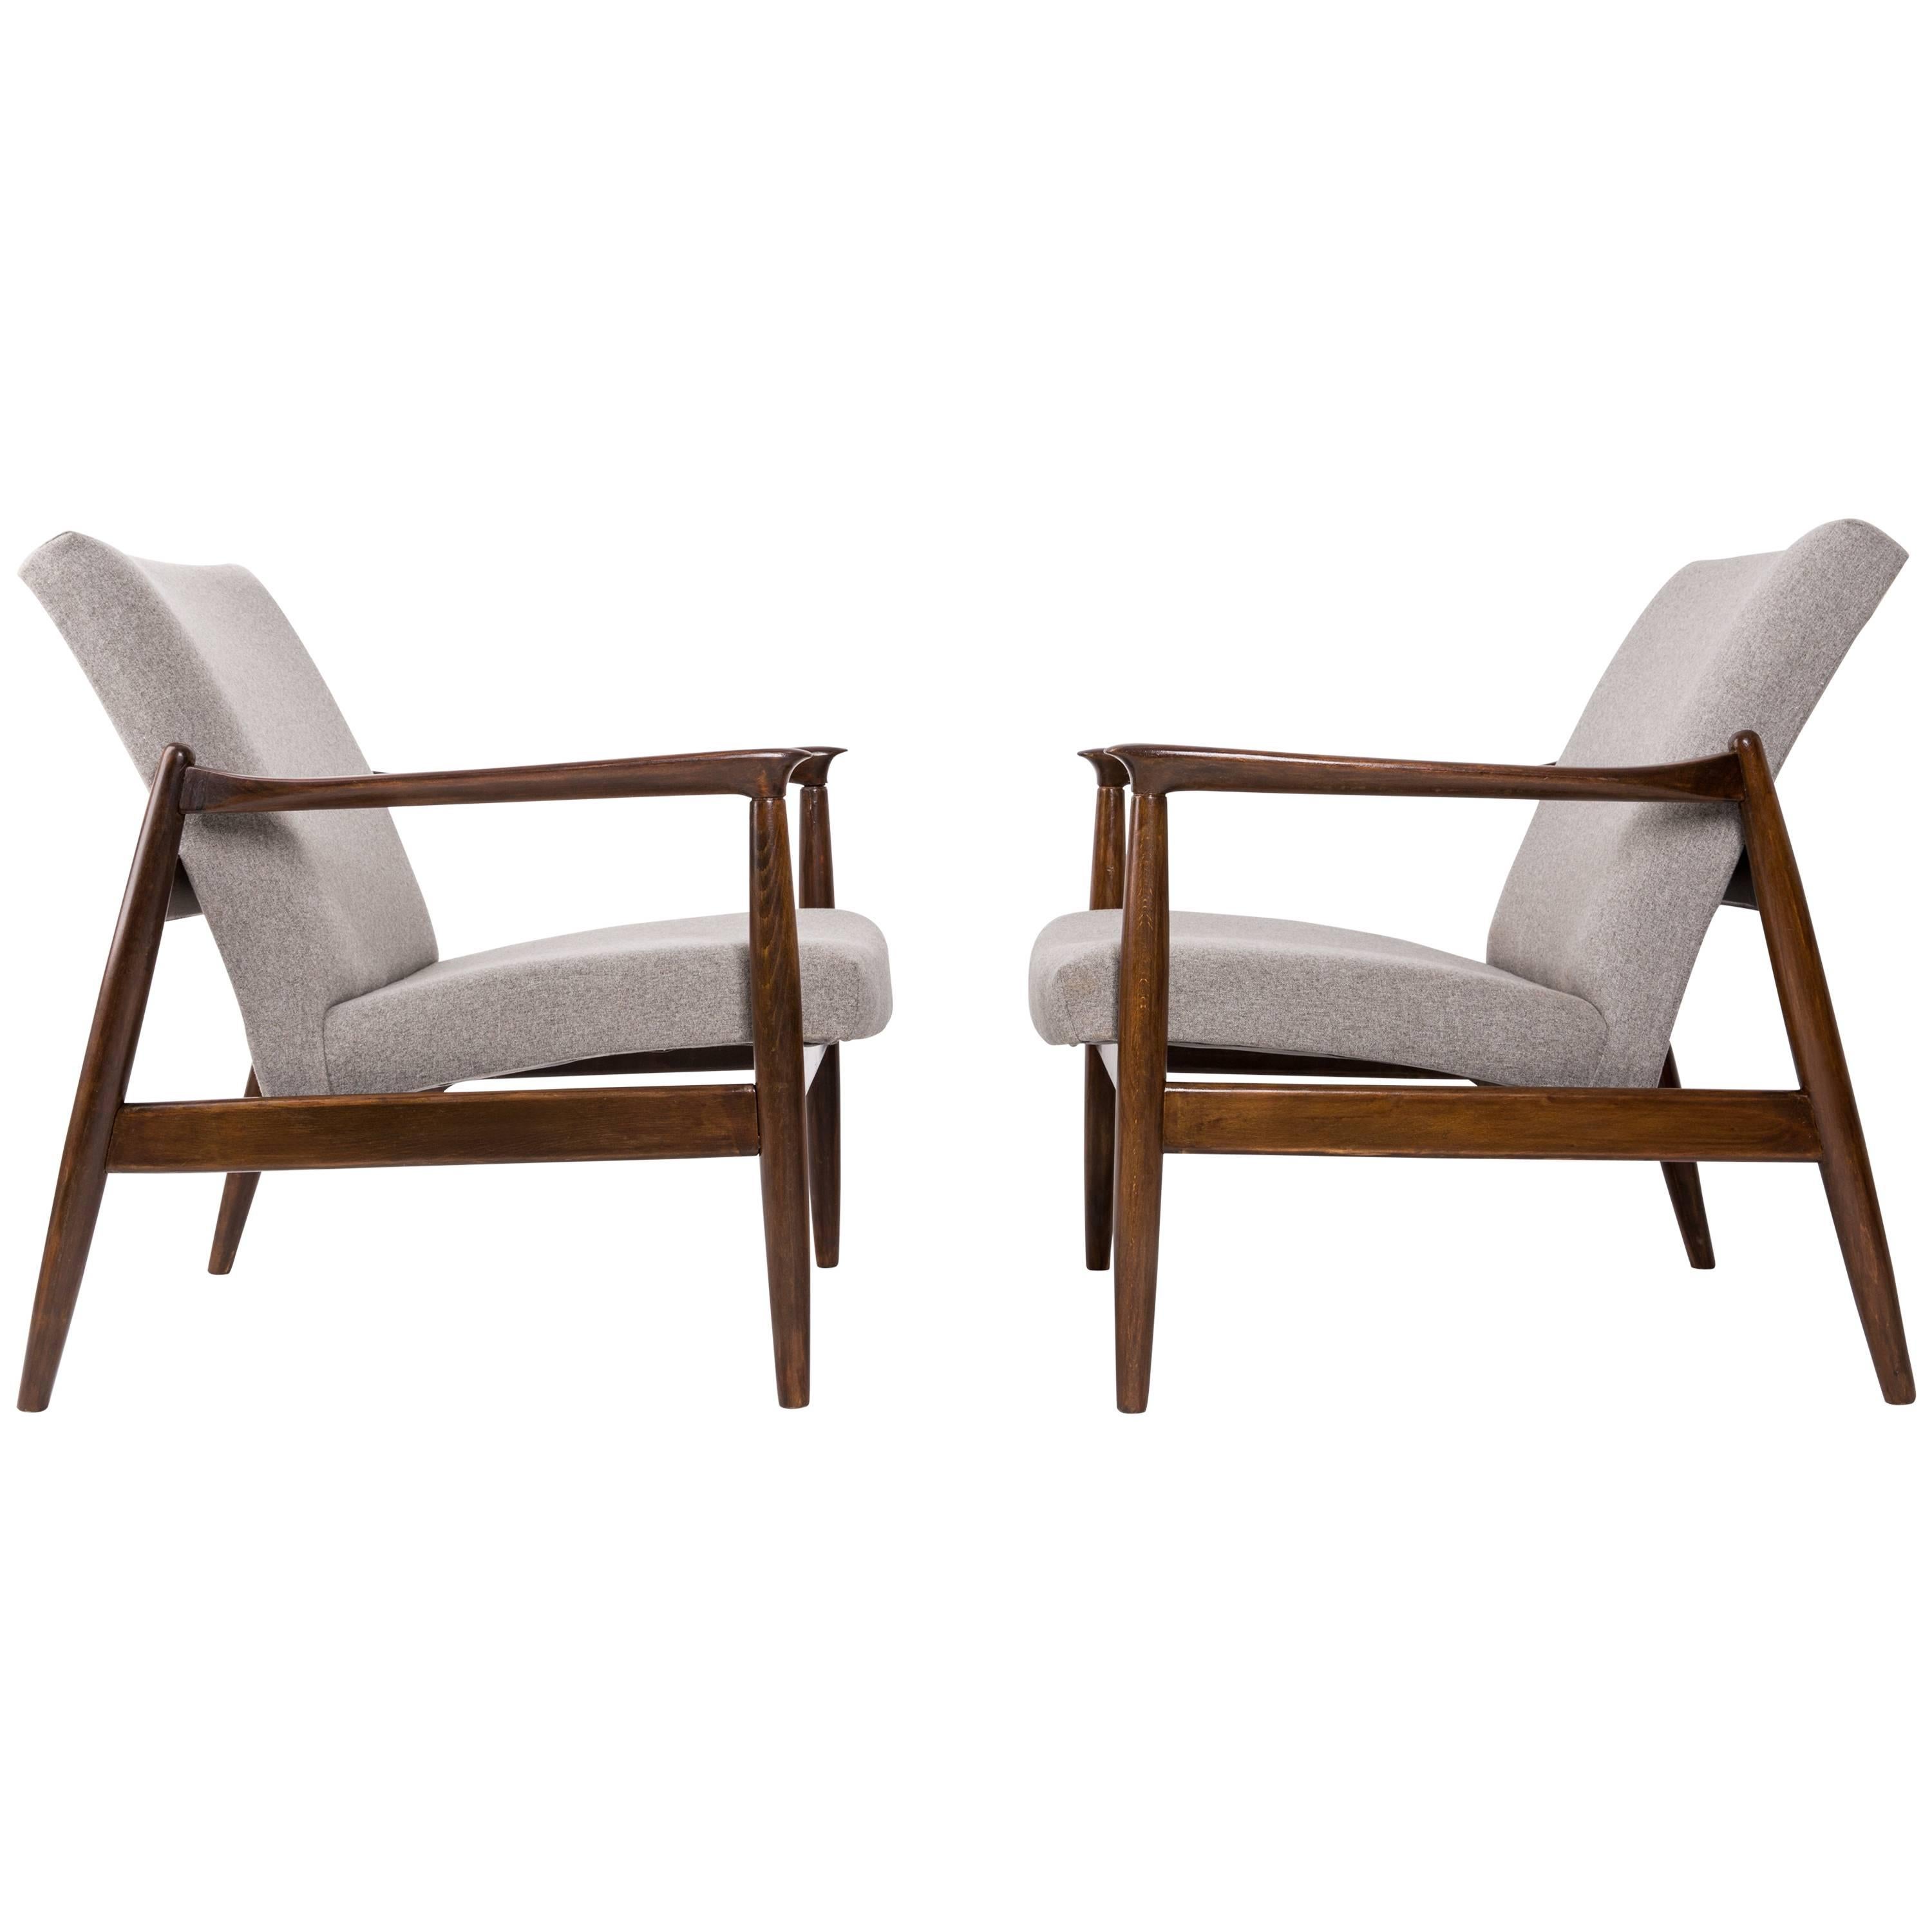 Pair of Beige Armchairs, Edmund Homa, 1960s For Sale